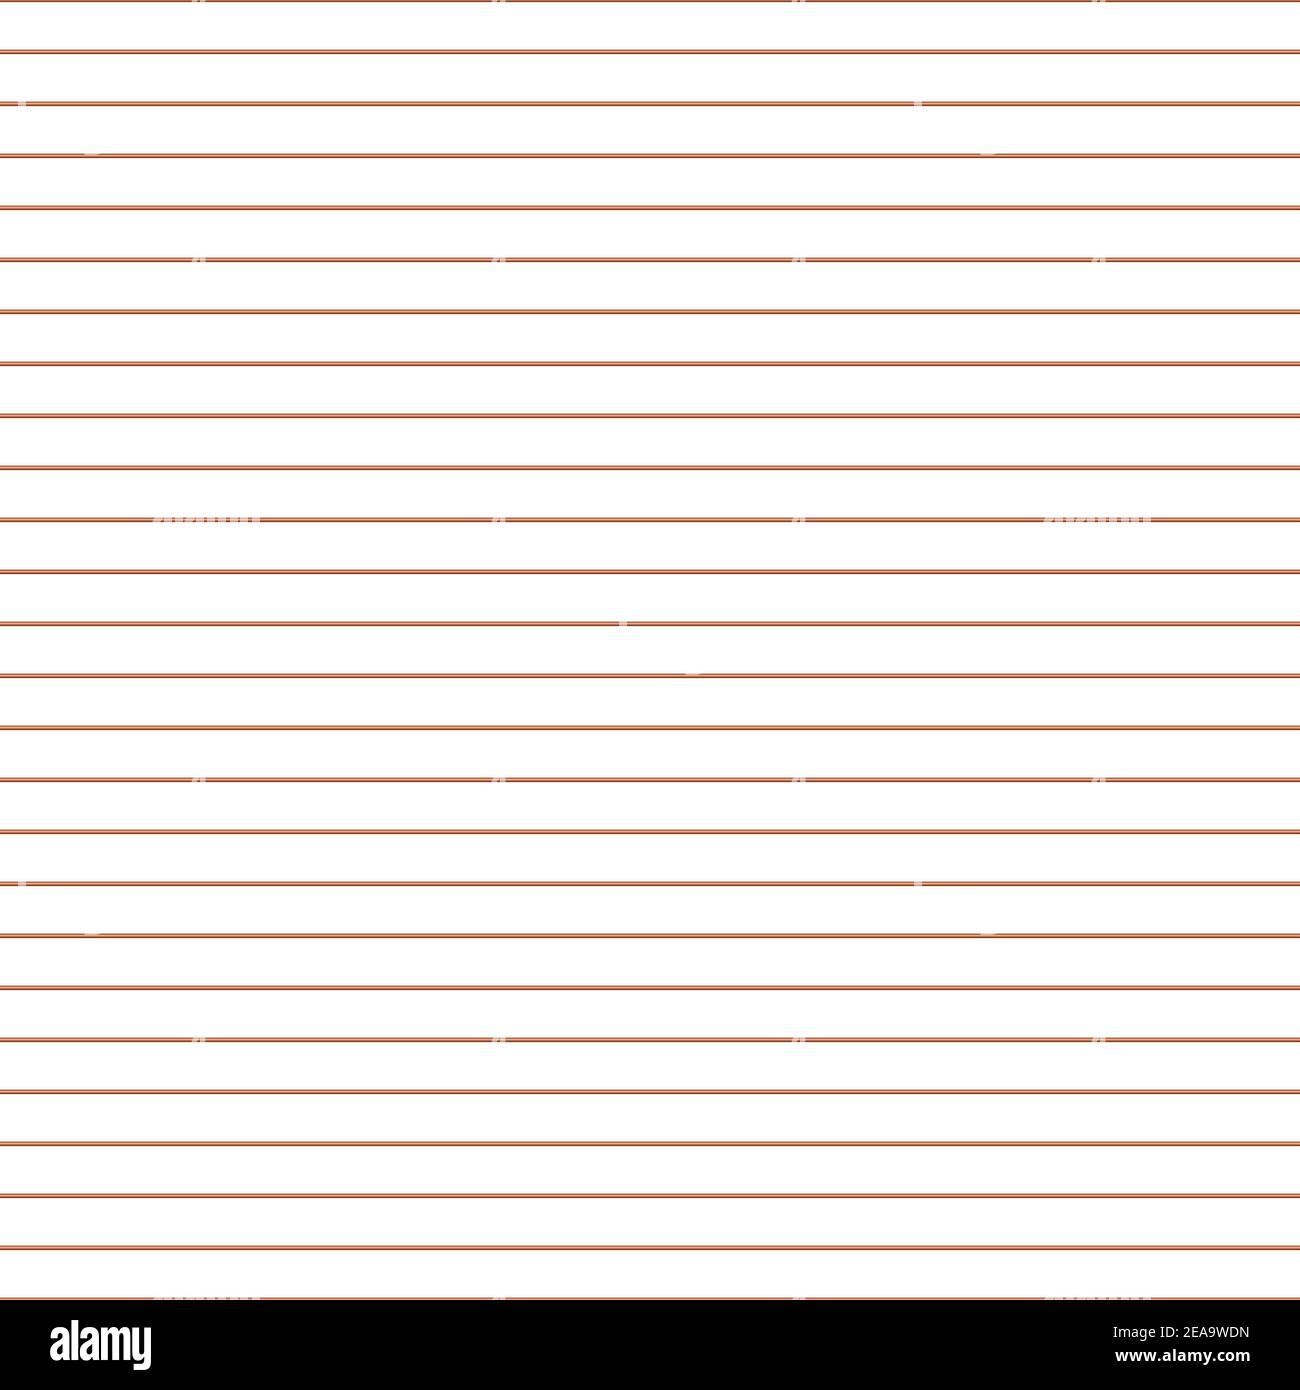 Grid paper. Abstract striped background with color horizontal lines ...